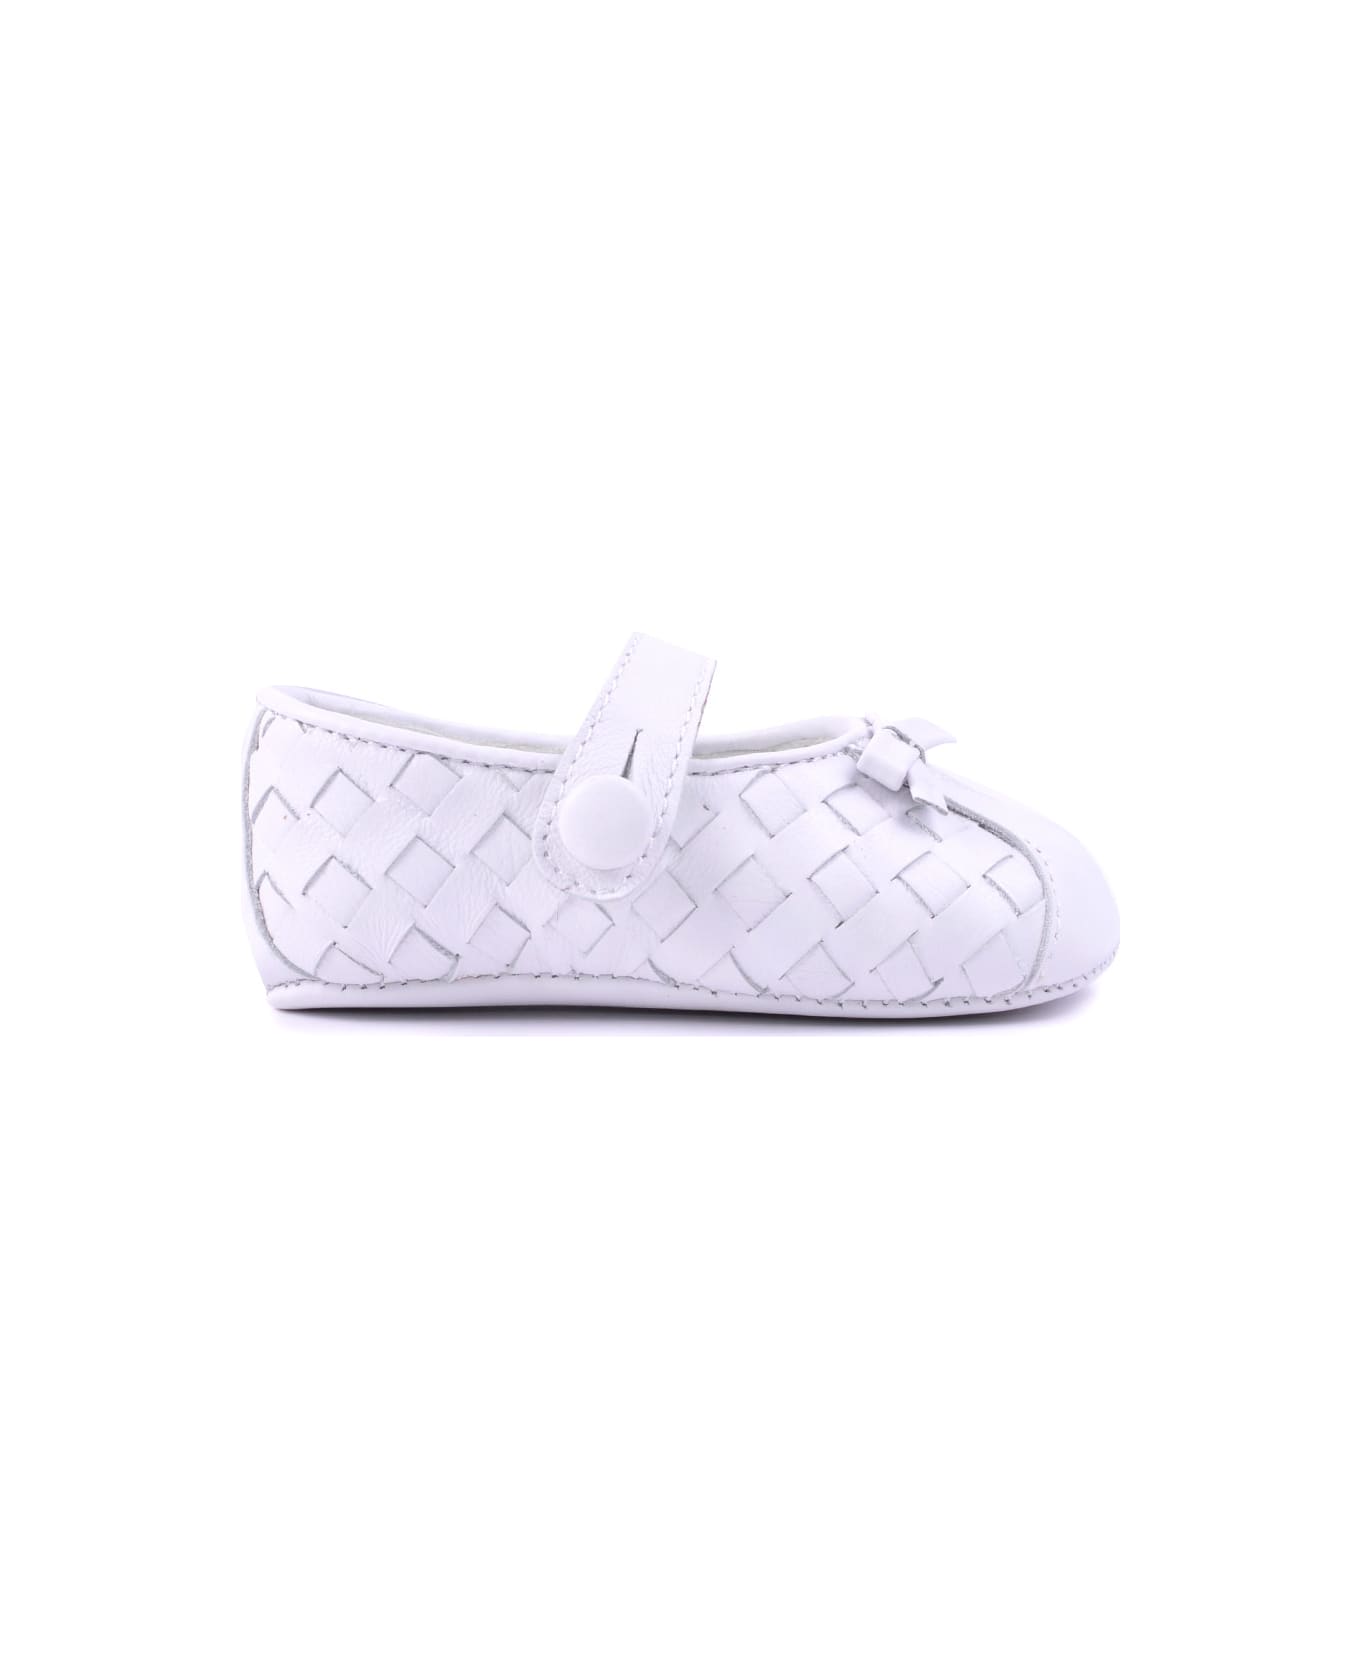 Gallucci Leather Shoes - White